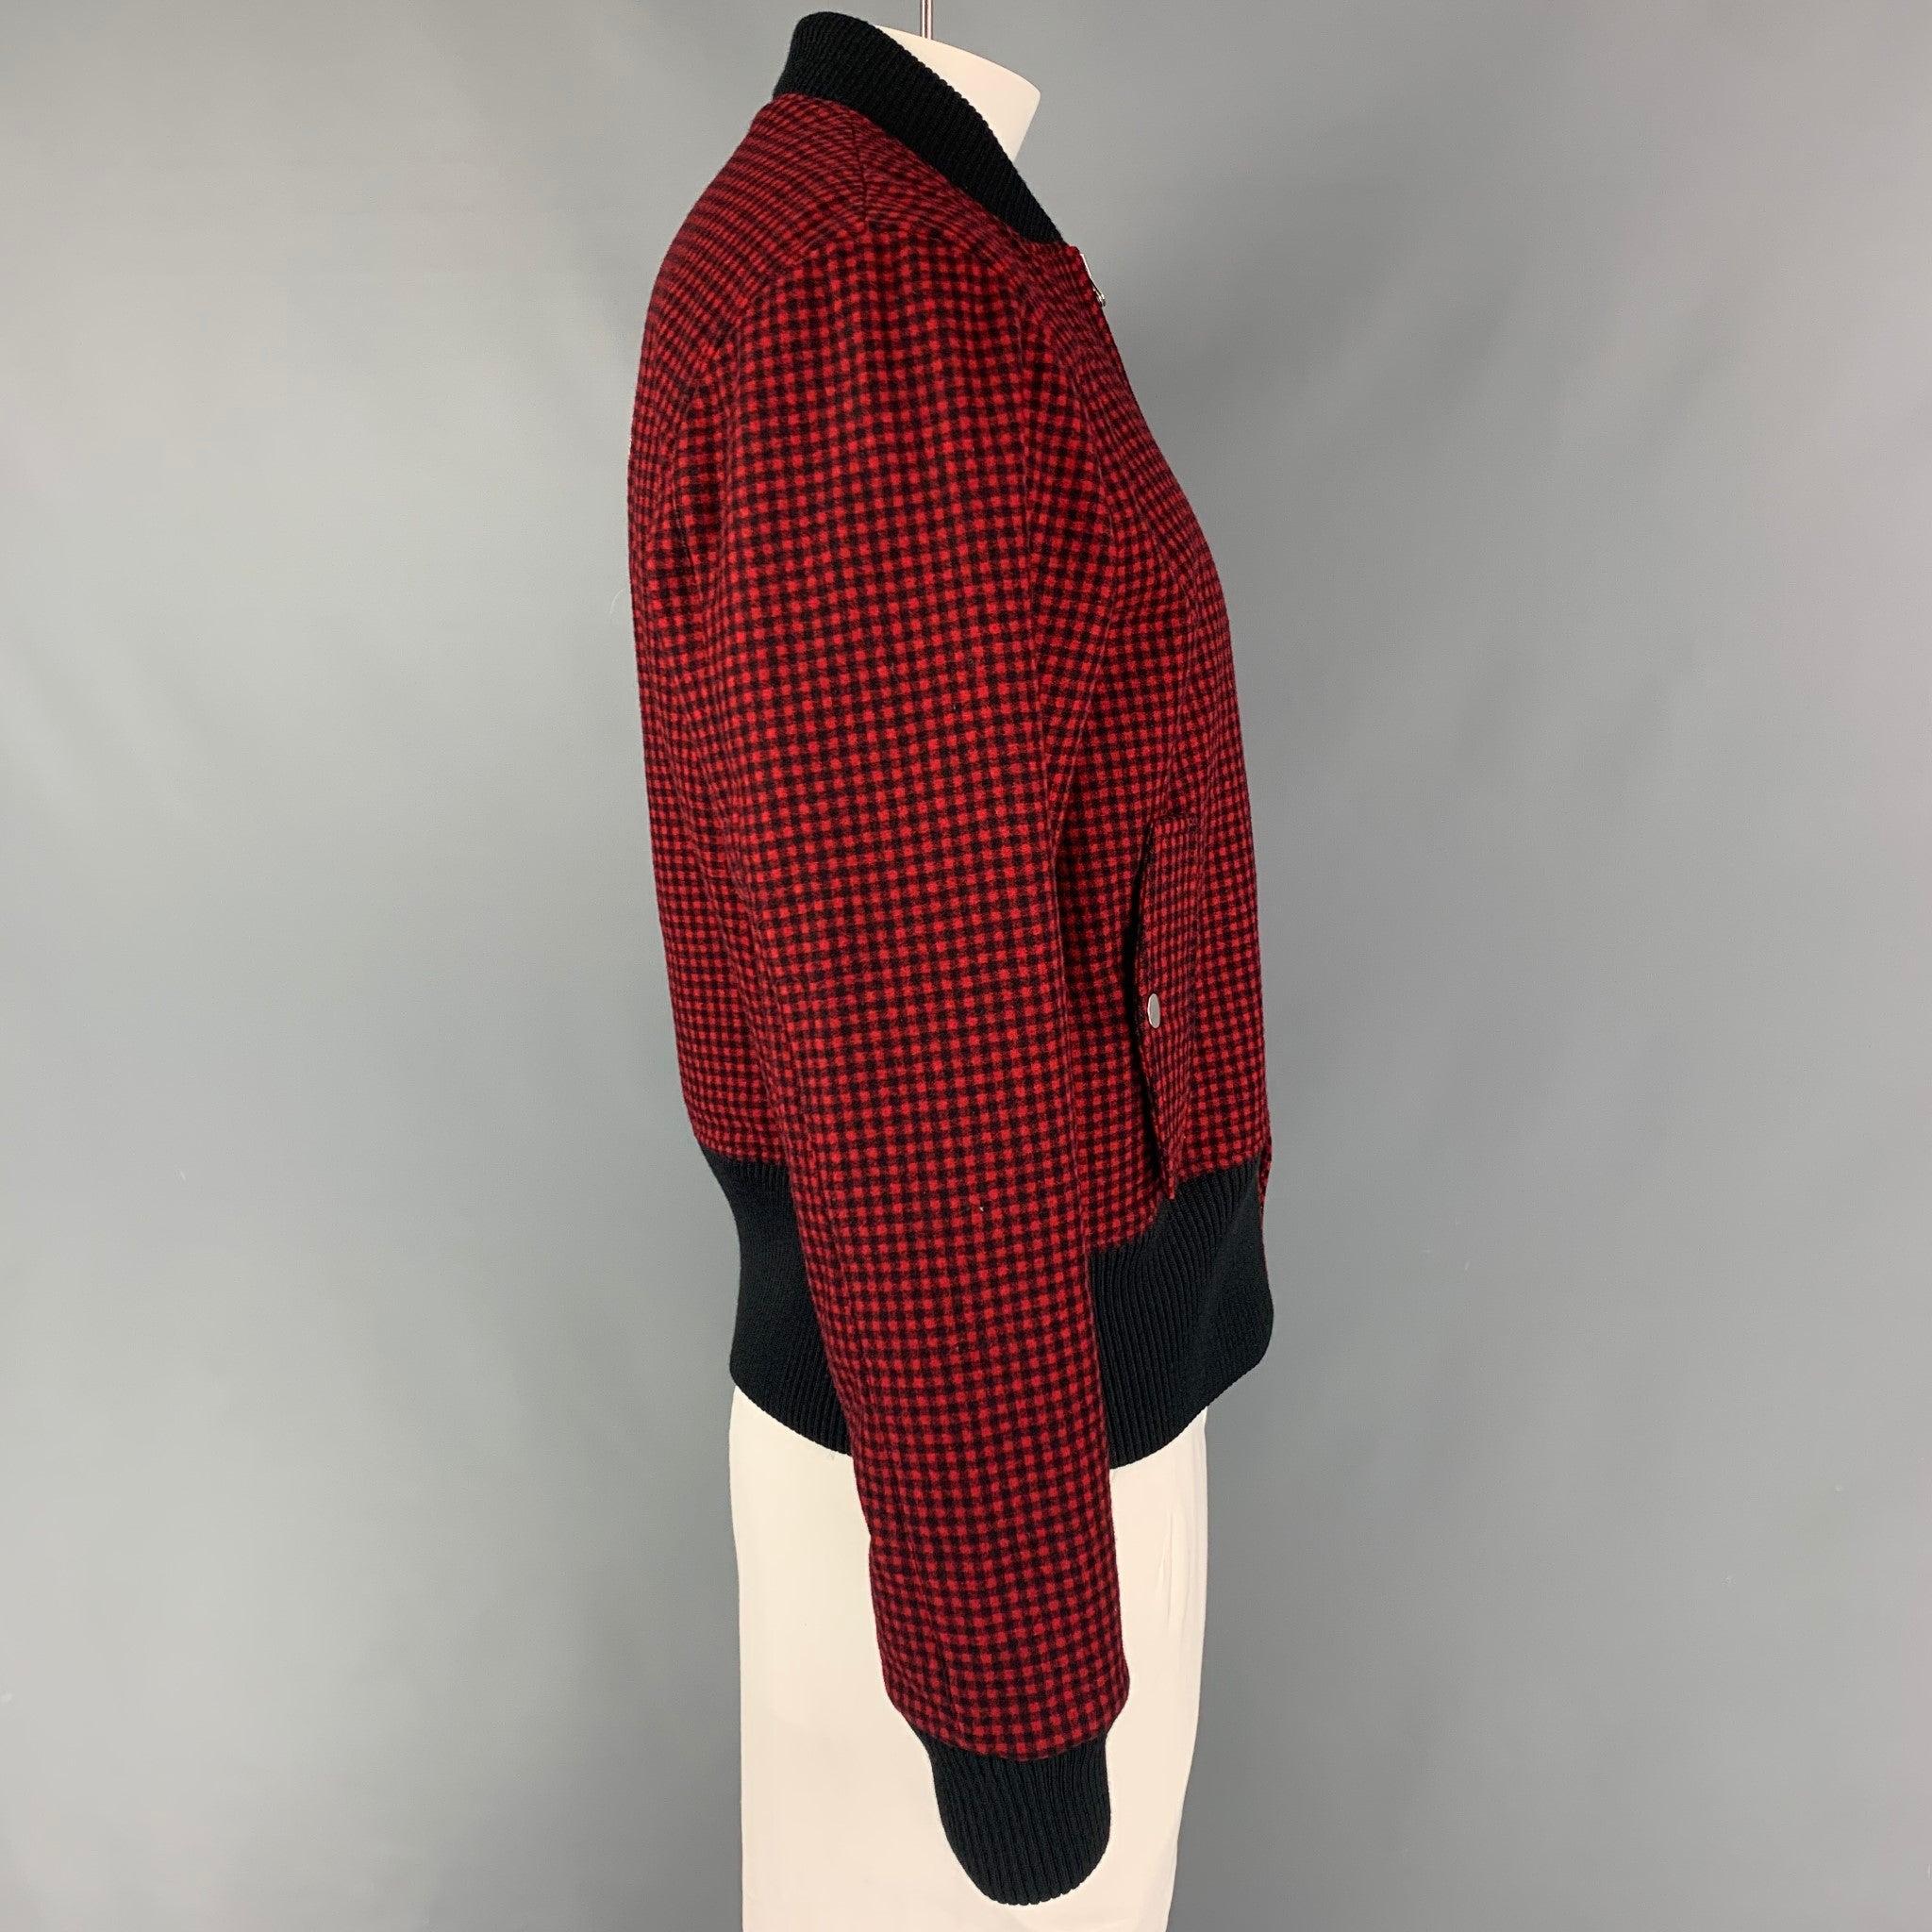 BAND OF OUTSIDERS jacket comes in a red & black checkered wool featuring a bomber style, ribbed hem, embroidered back design, flap pockets, and a zip up closure. Excellent
Pre-Owned Condition. Fabric tag removed.  

Marked:   Size tag removed. 